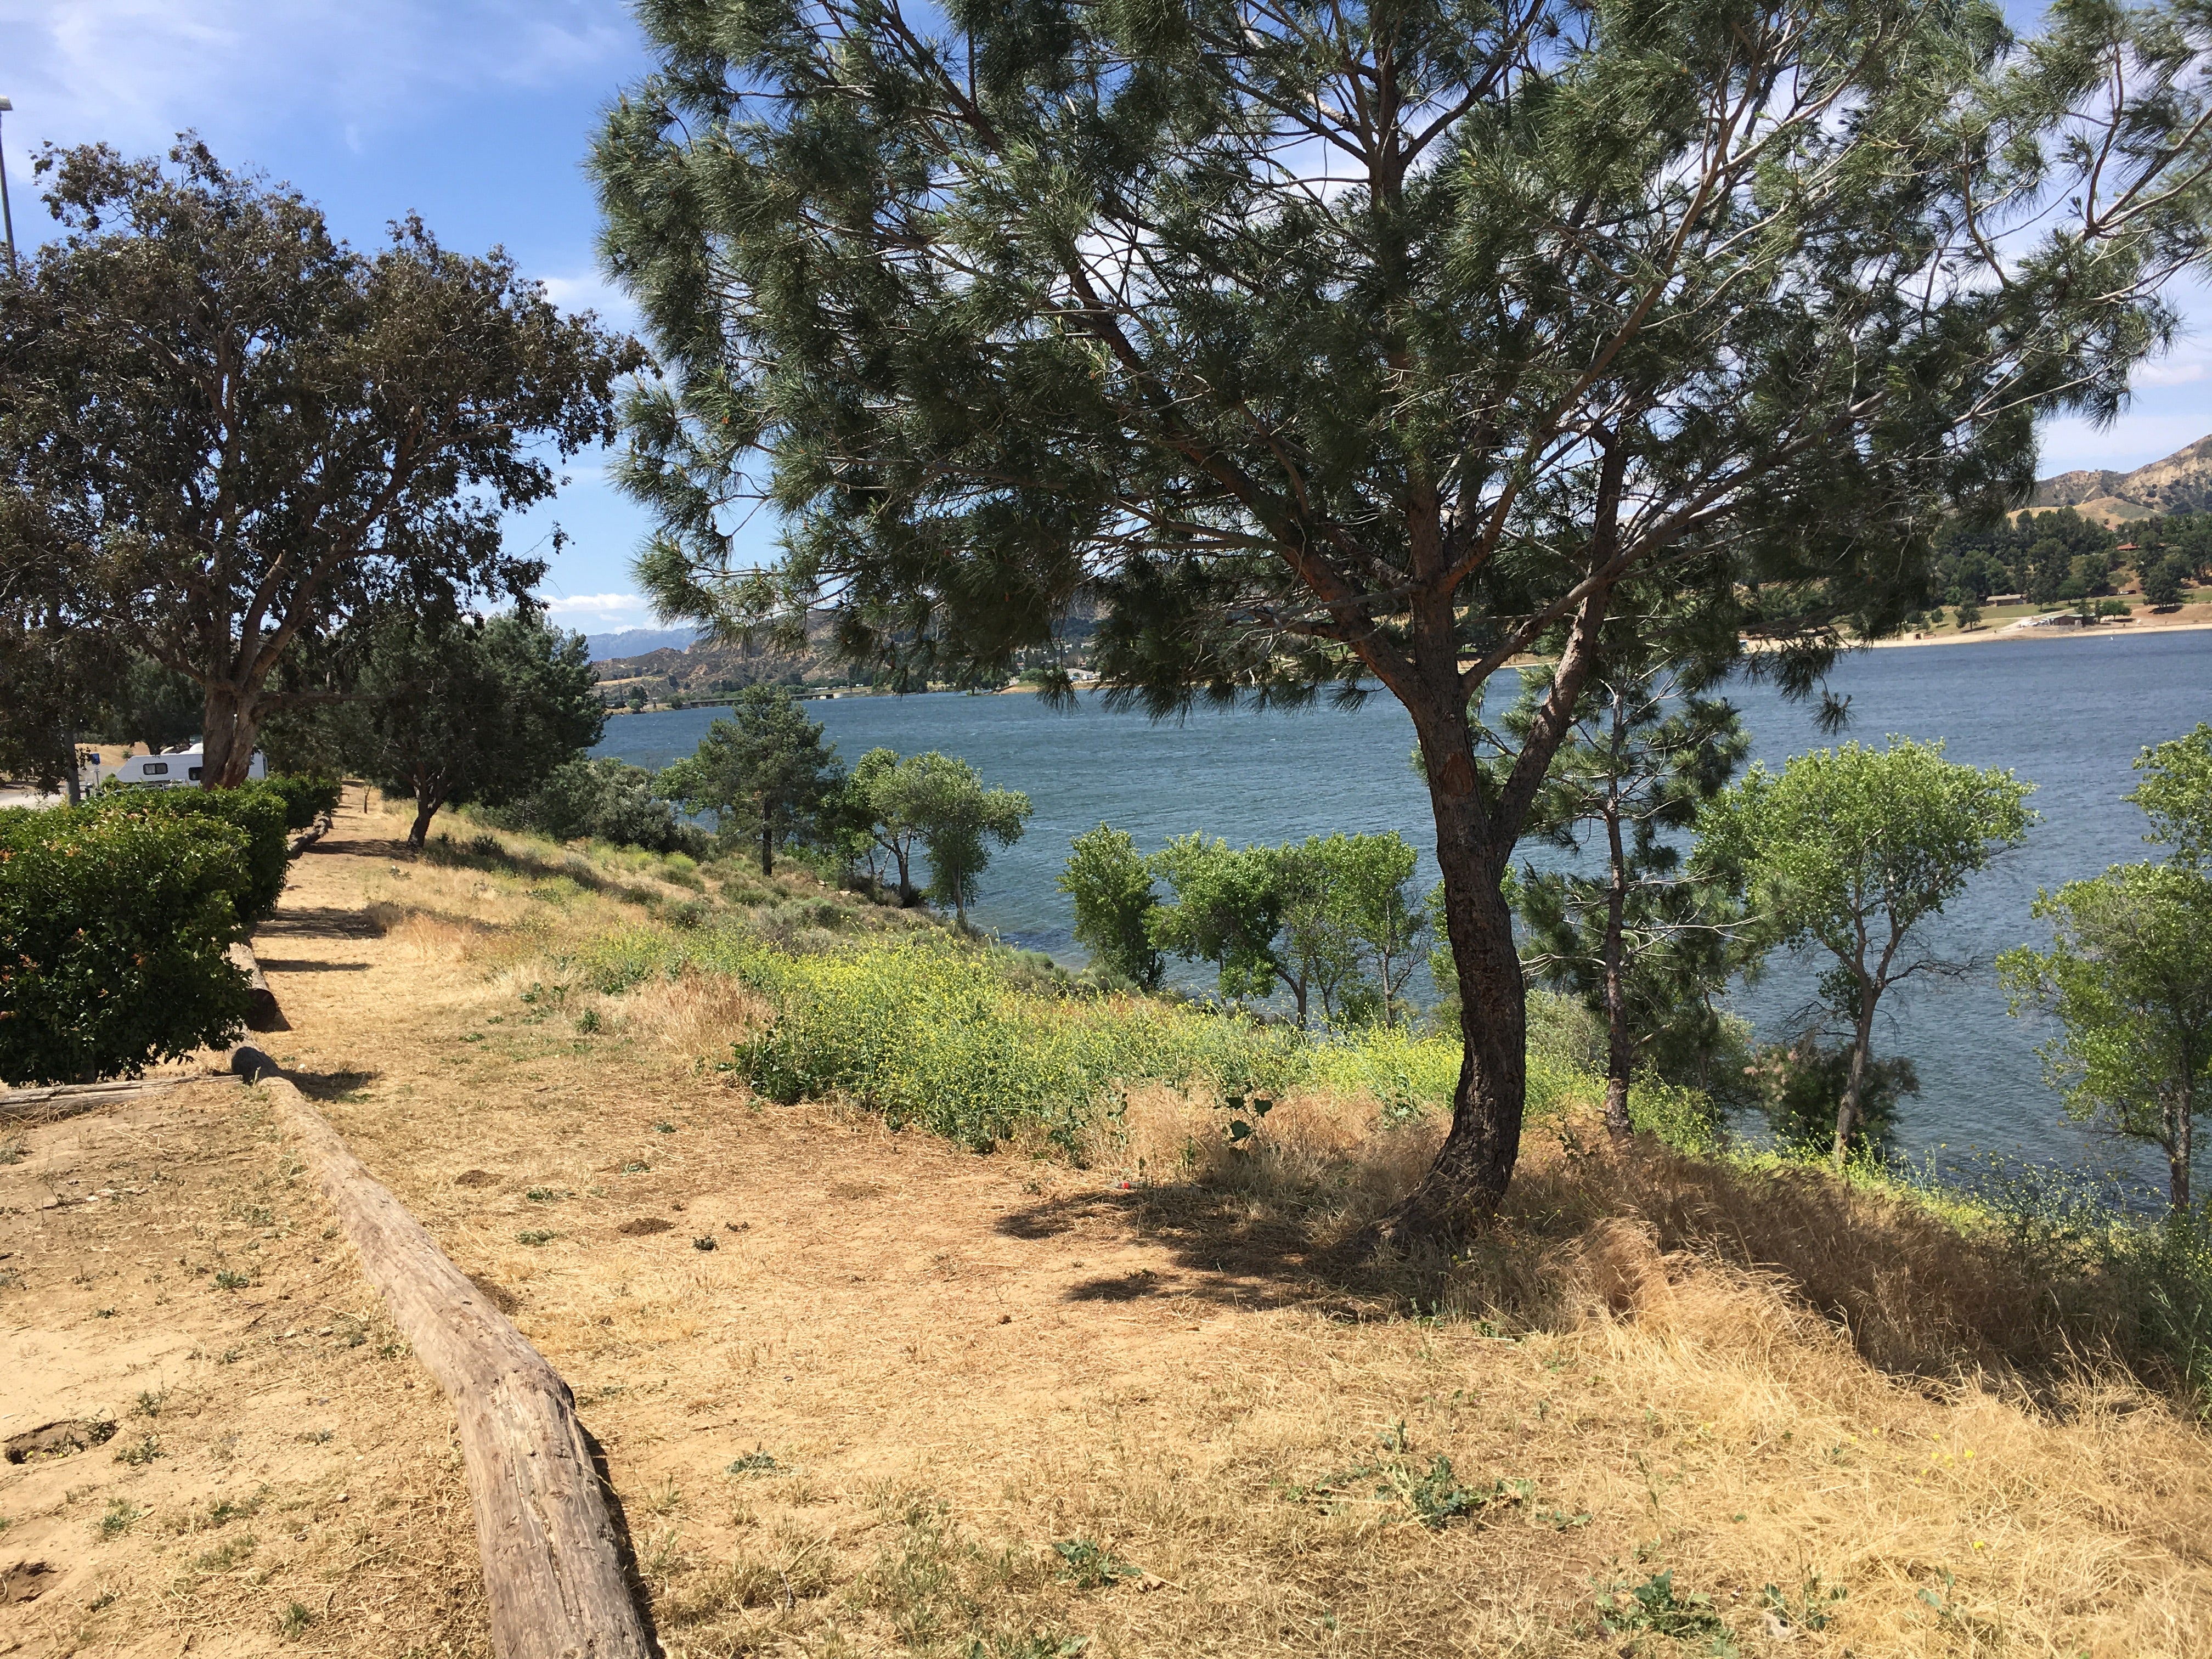 Camper submitted image from Castaic Lake State Recreation Area - 4